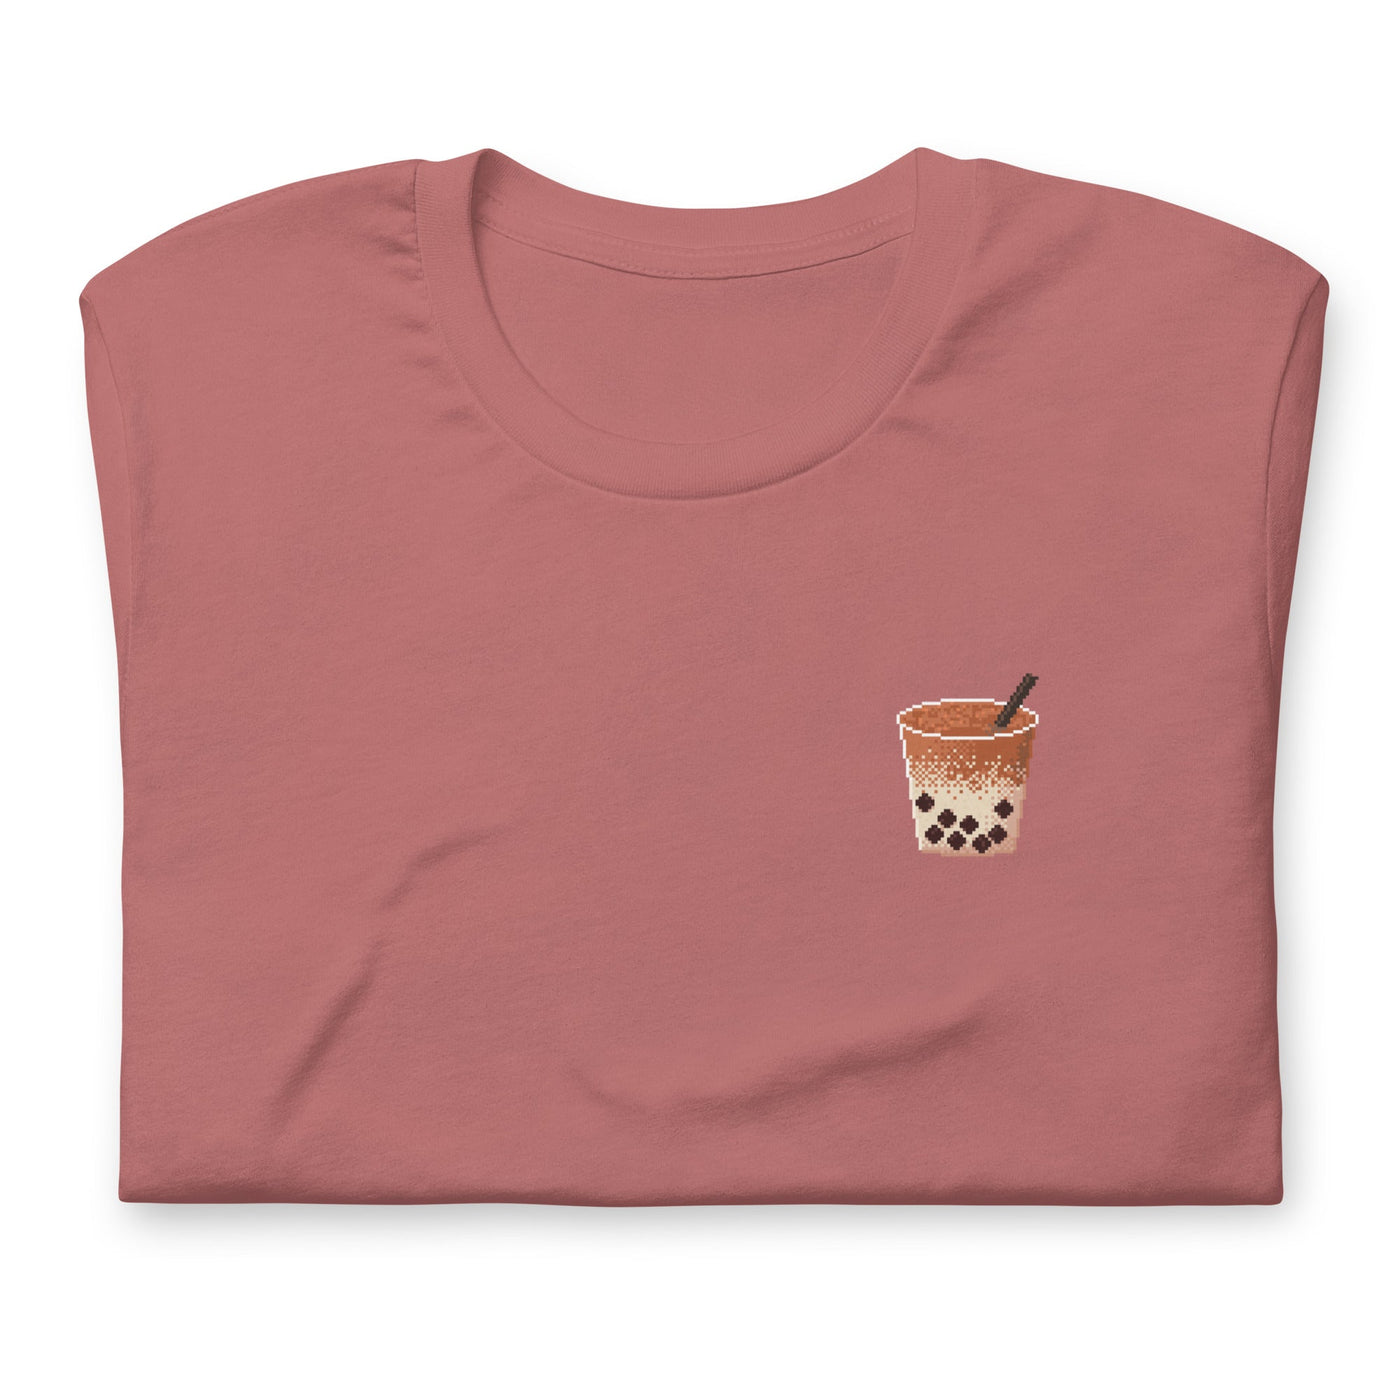 Pixel Boba | Unisex t-shirt | Cozy Gamer Threads and Thistles Inventory Mauve S 